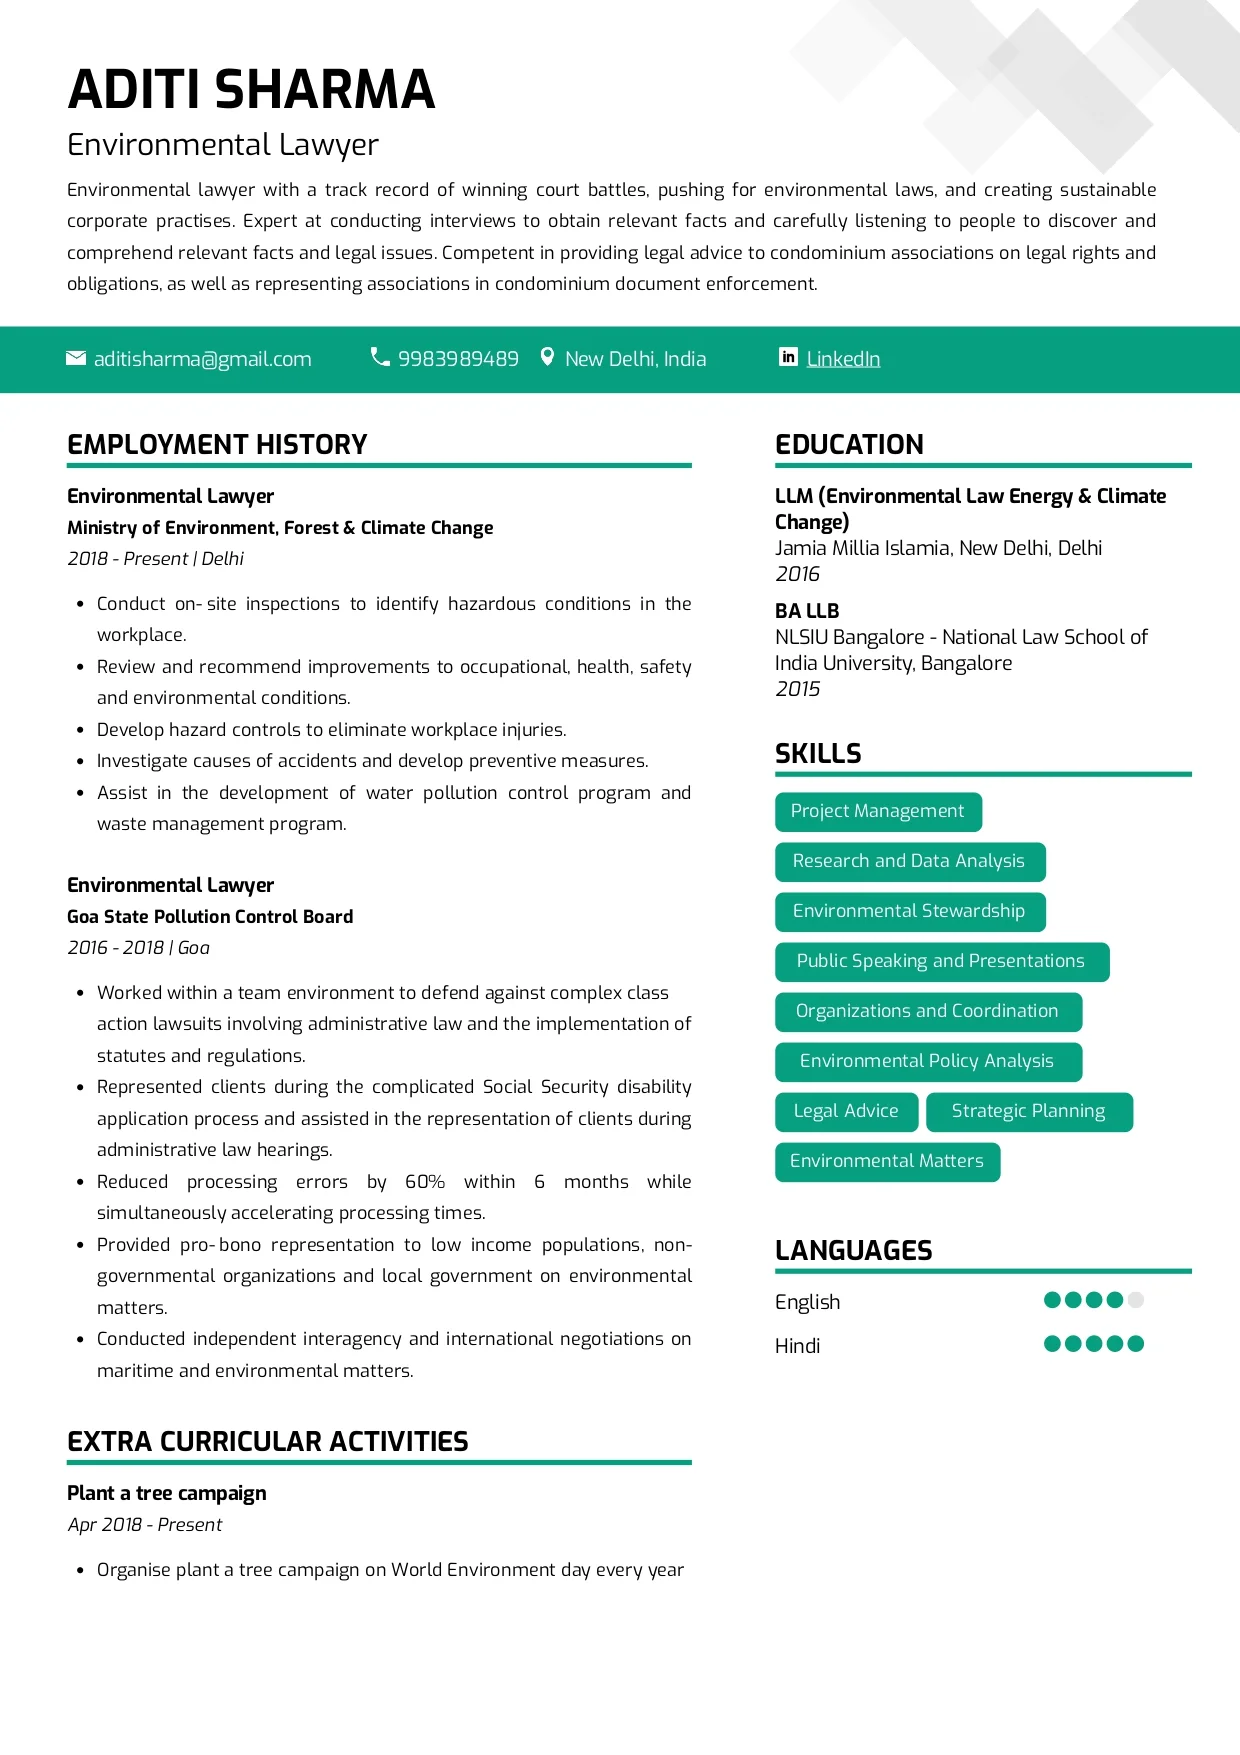 Sample Resume of Environmental Lawyer | Free Resume Templates & Samples on Resumod.co